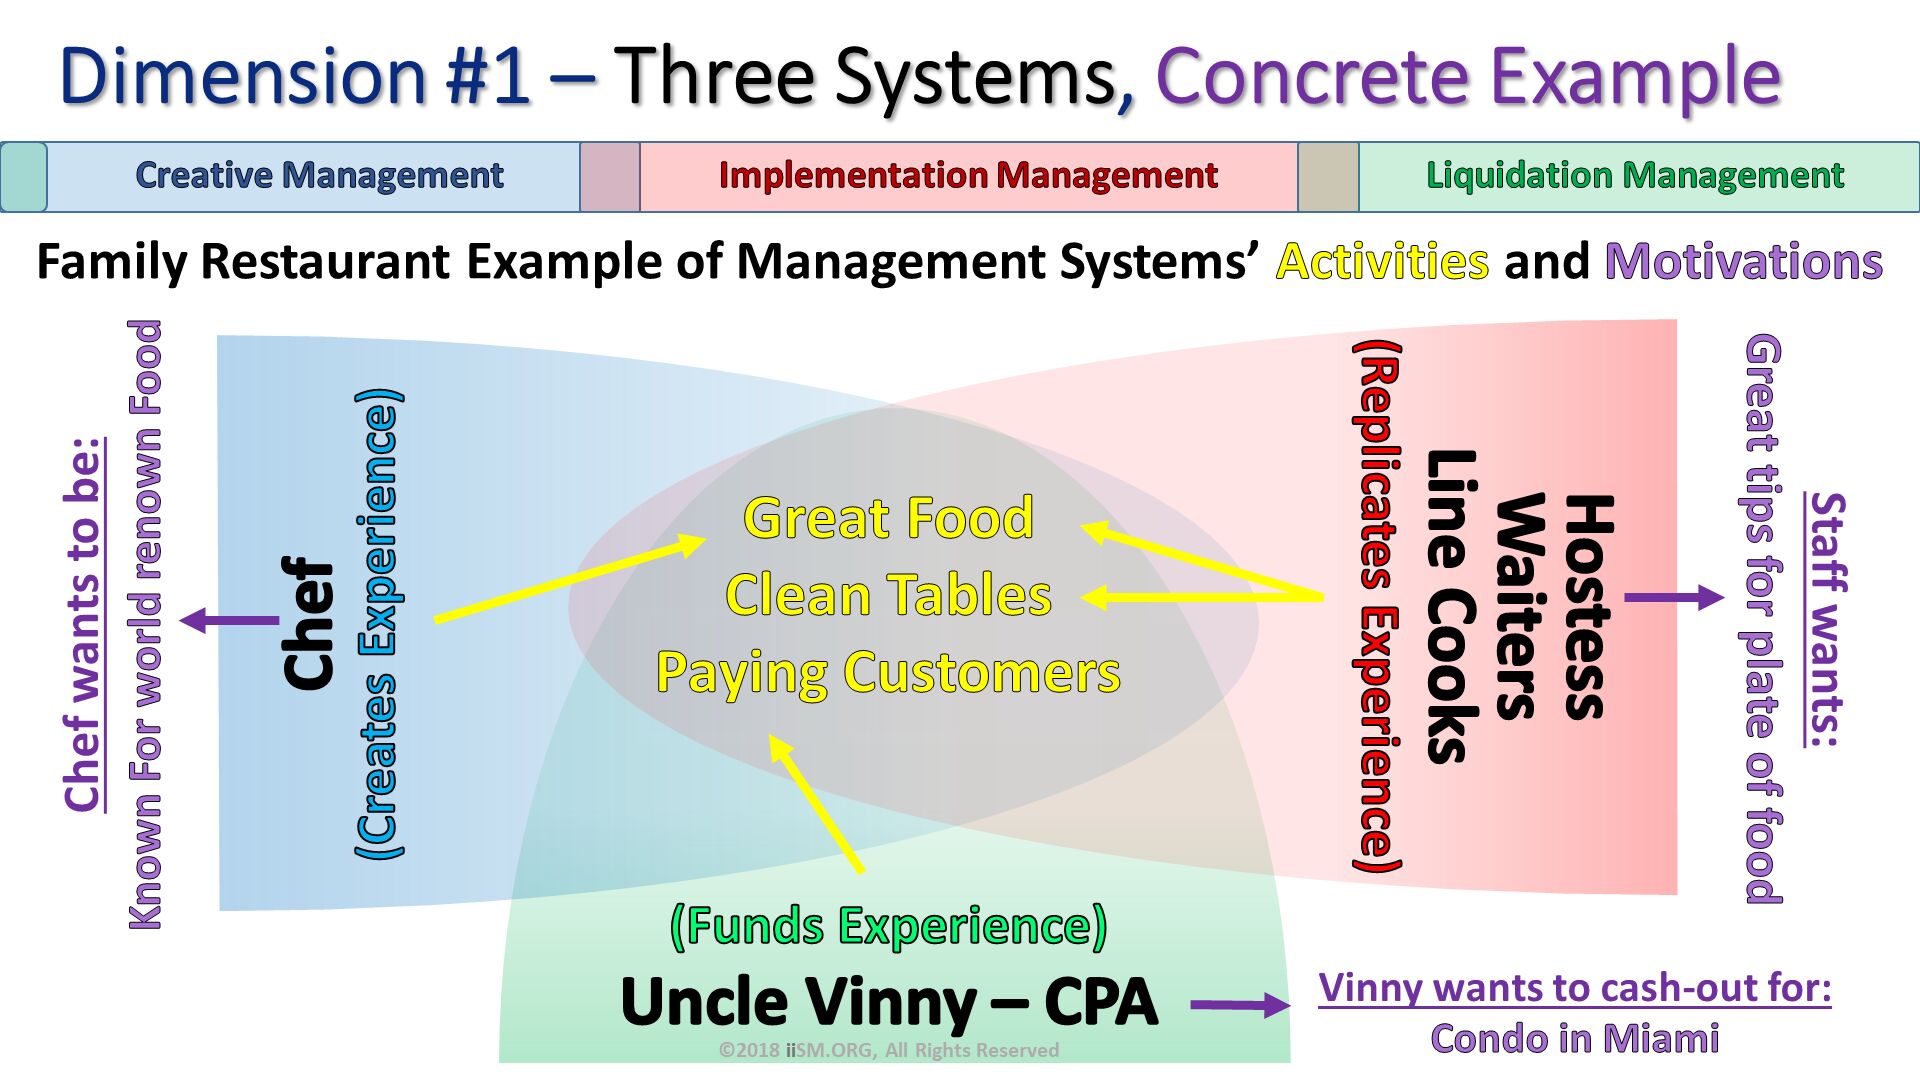 Dimension #1 – Three Systems, Concrete Example. Family Restaurant Example of Management Systems’ Activities and Motivations. Vinny wants to cash-out for:
Condo in Miami. Staff wants:
Great tips for plate of food. Chef wants to be:
Known For world renown Food . ©2018 iiSM.ORG, All Rights Reserved. 